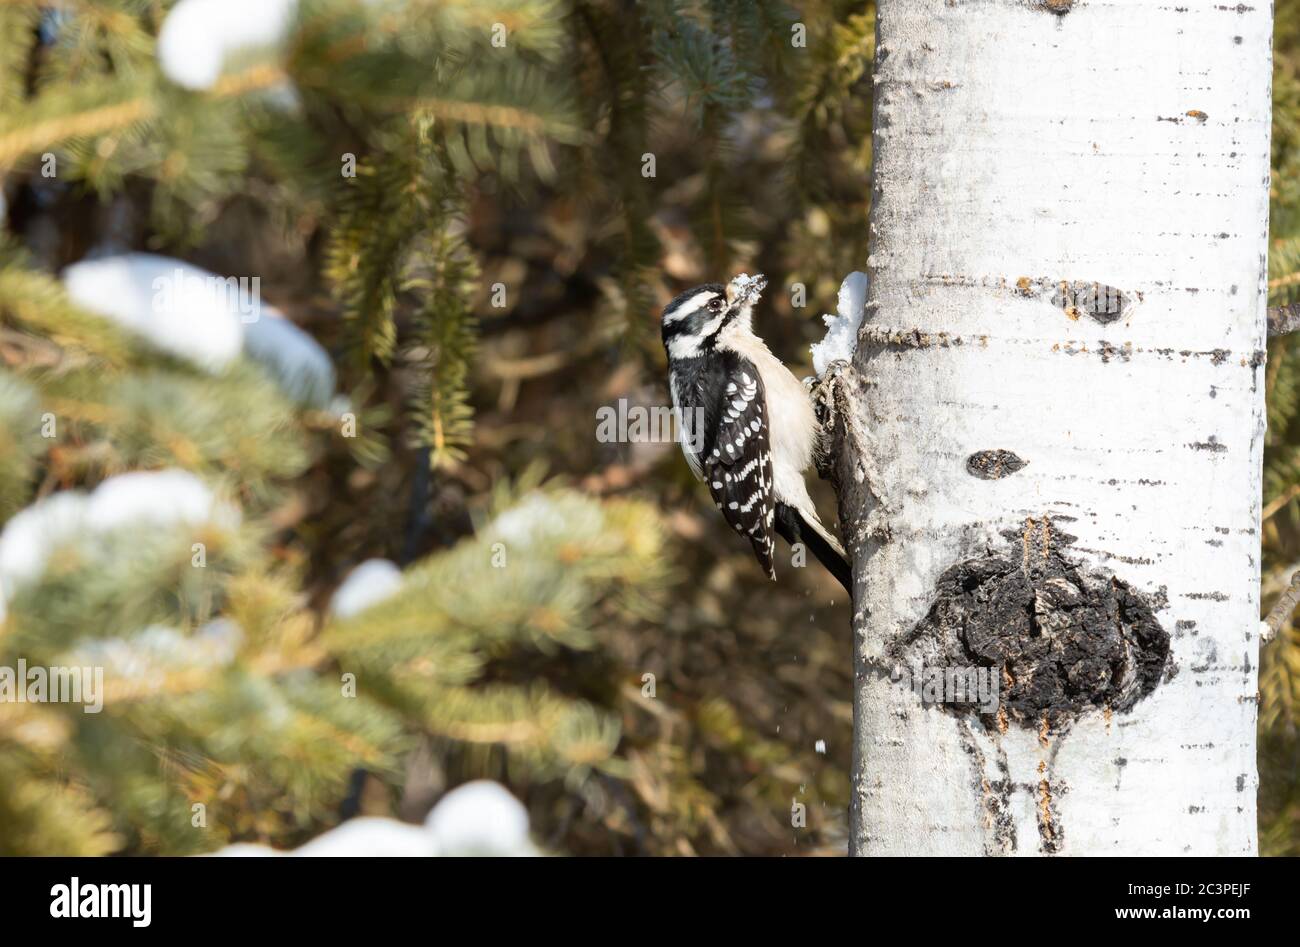 A downy woodpecker, Picoides pubescens, clinging to the side of a poplar tree during the winter time in forest in central Alberta, Canada Stock Photo